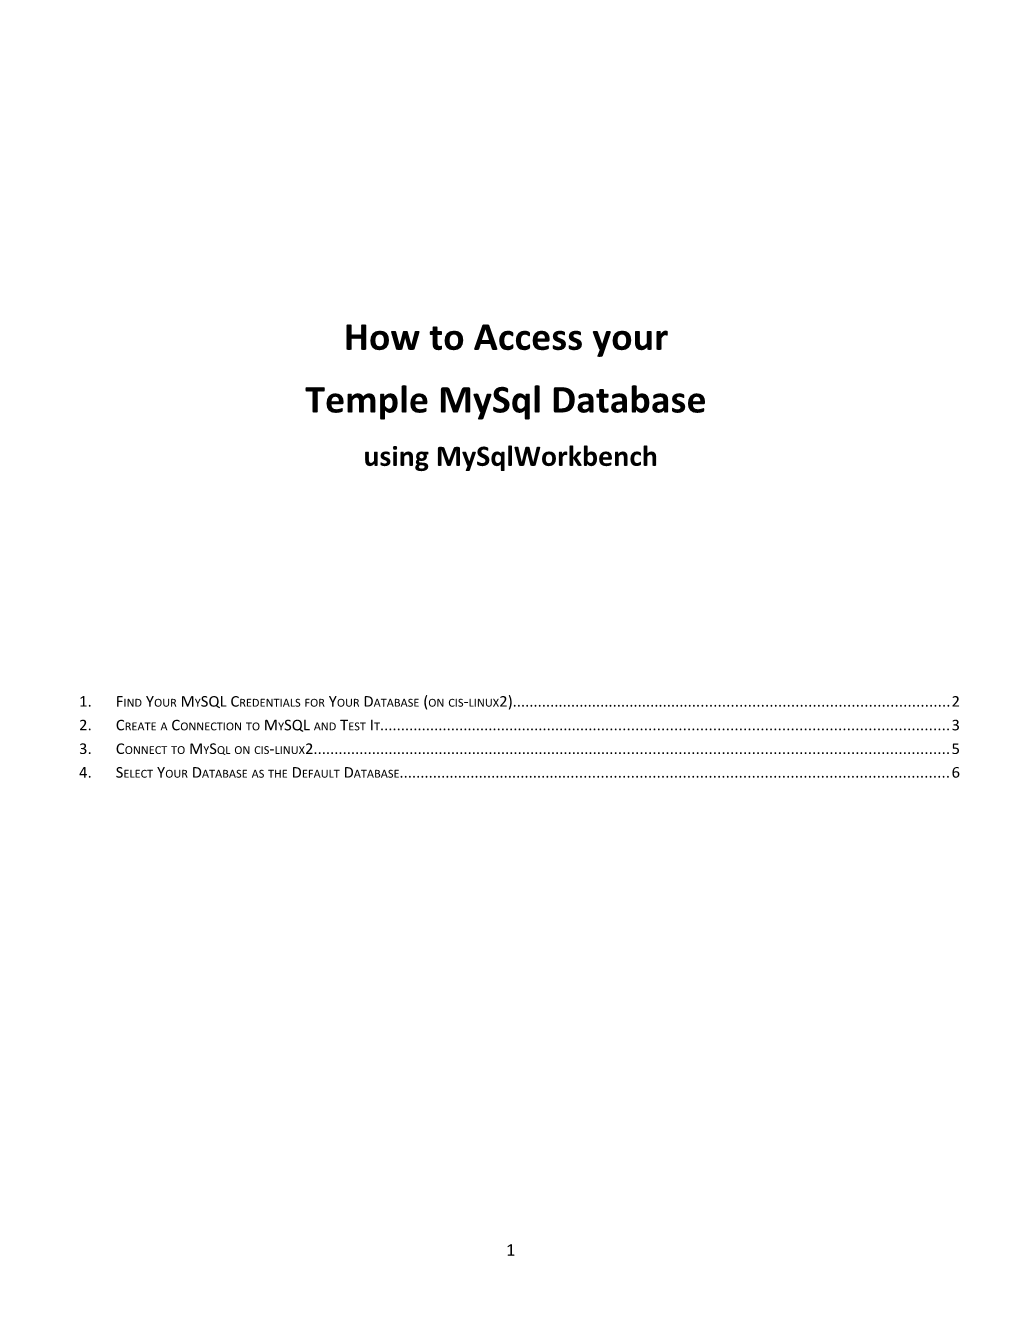 How to Access Your